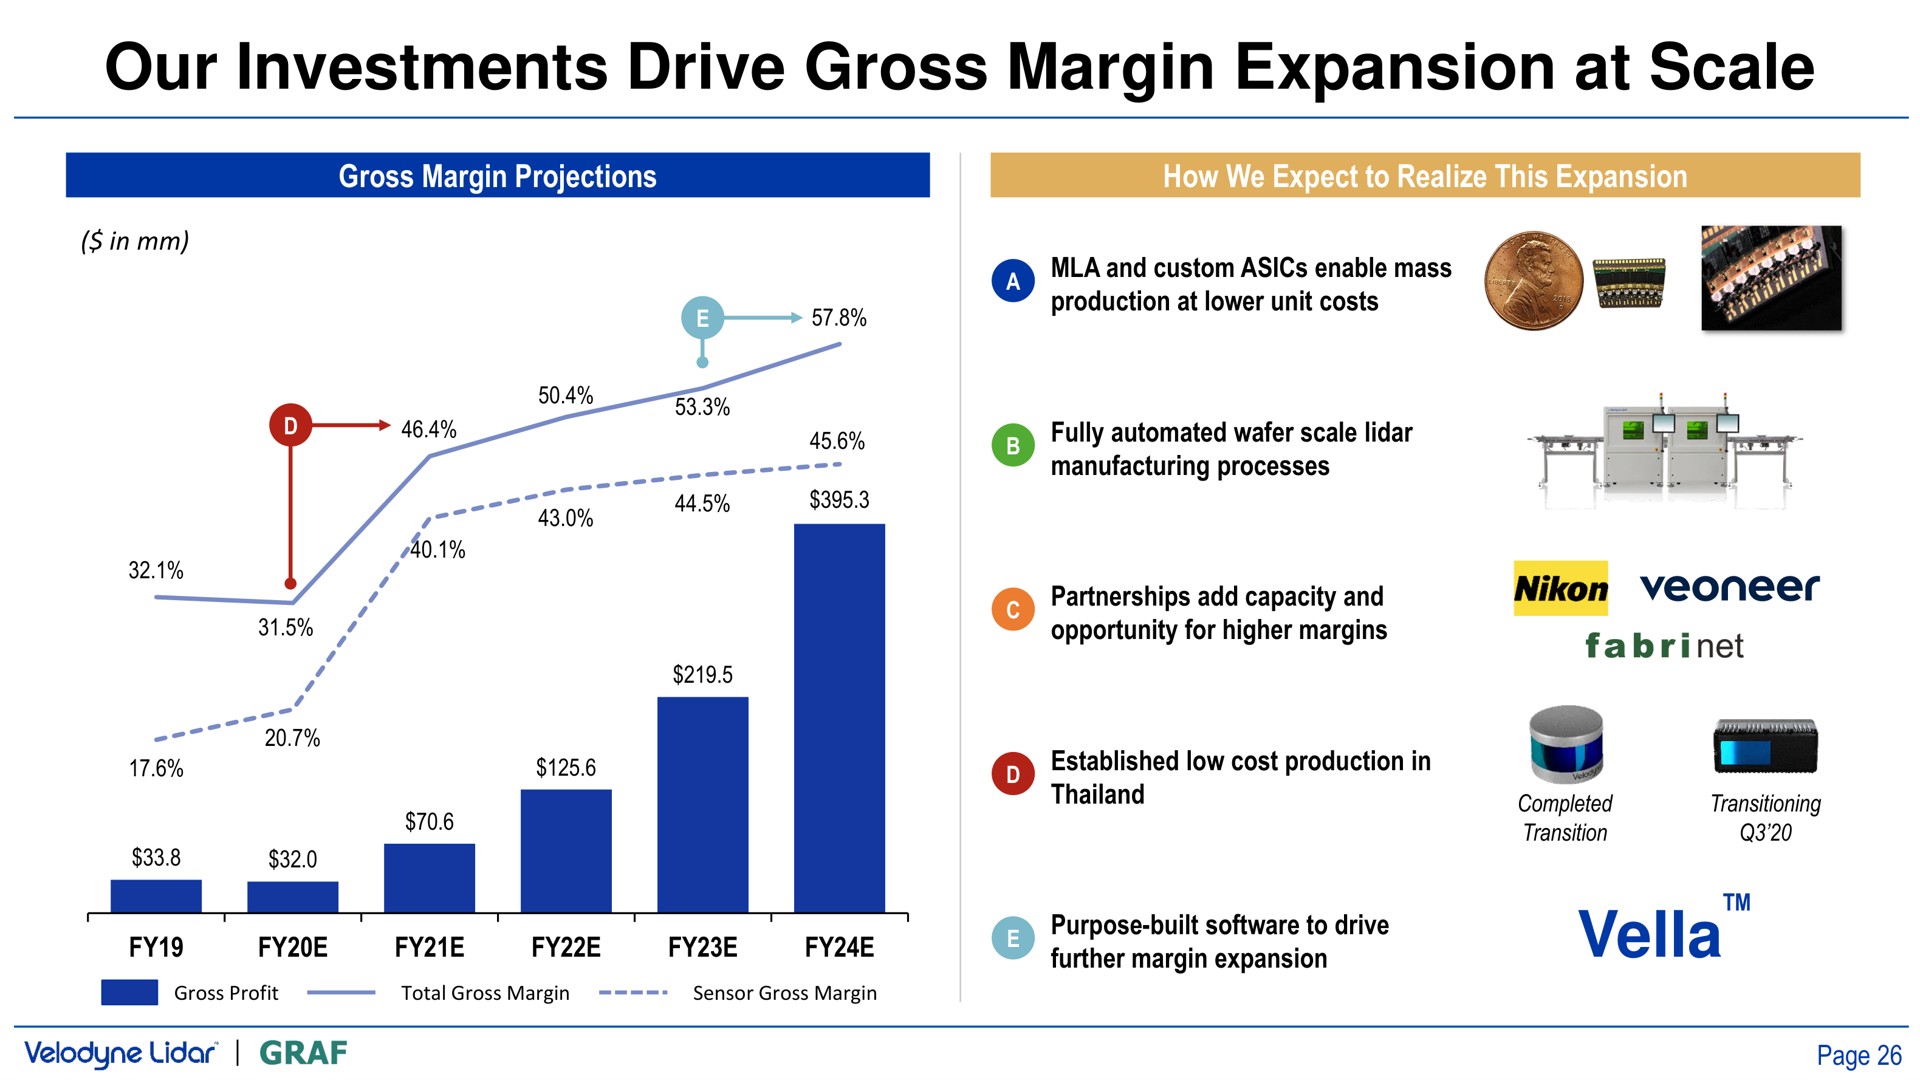 our investments drive gross margin expansion at scale | Velodyne Lidar